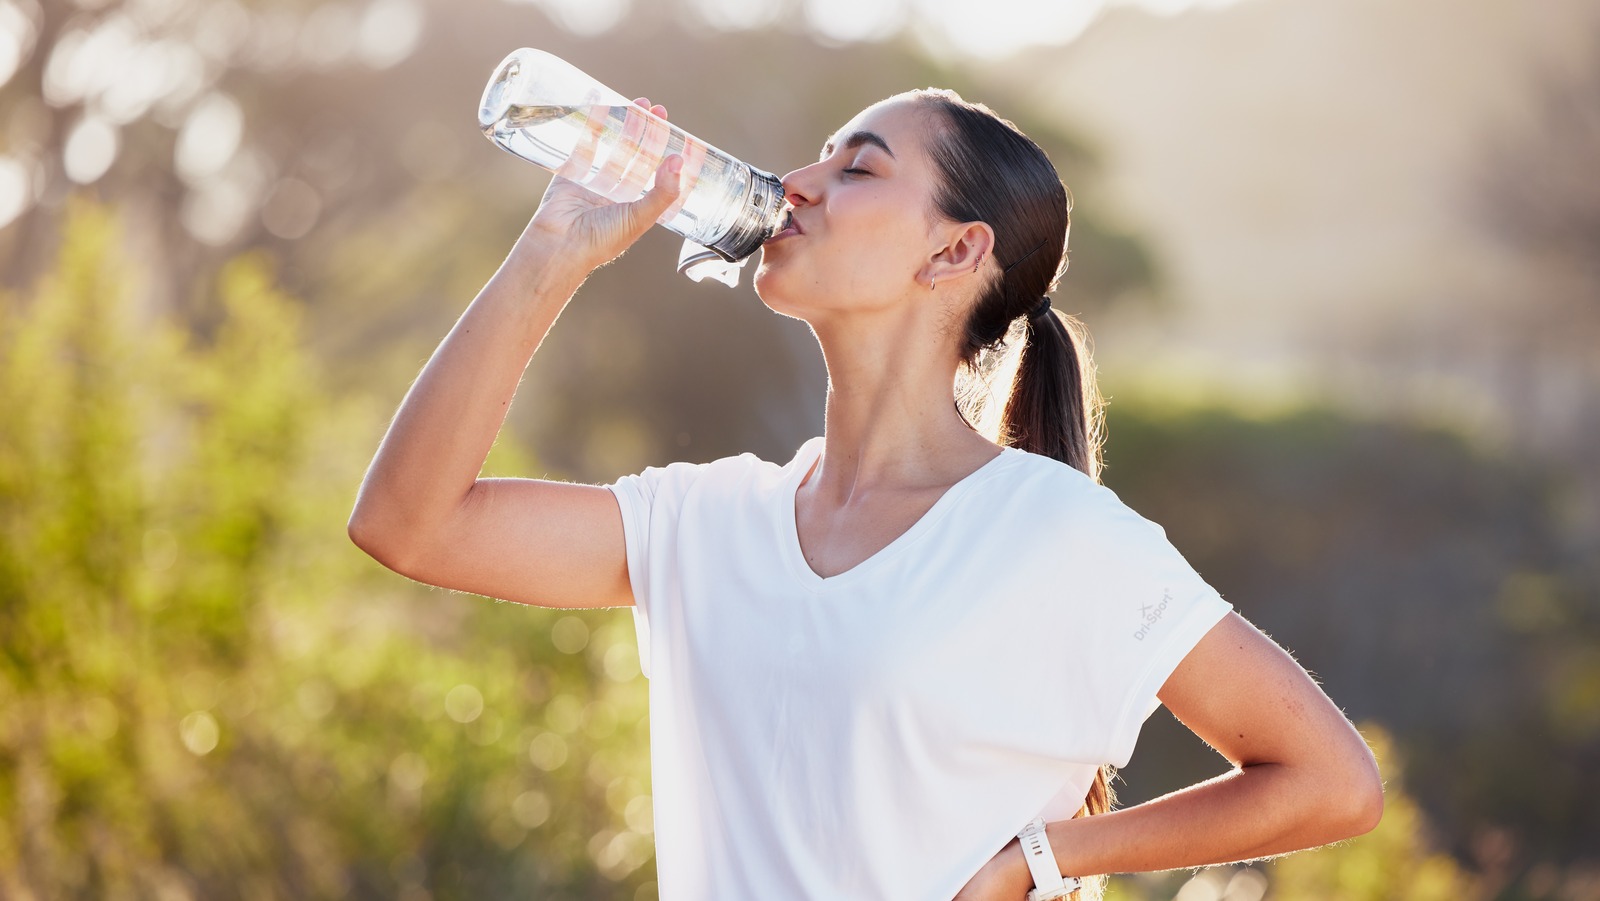 What should you drink to stay hydrated? It's not always water